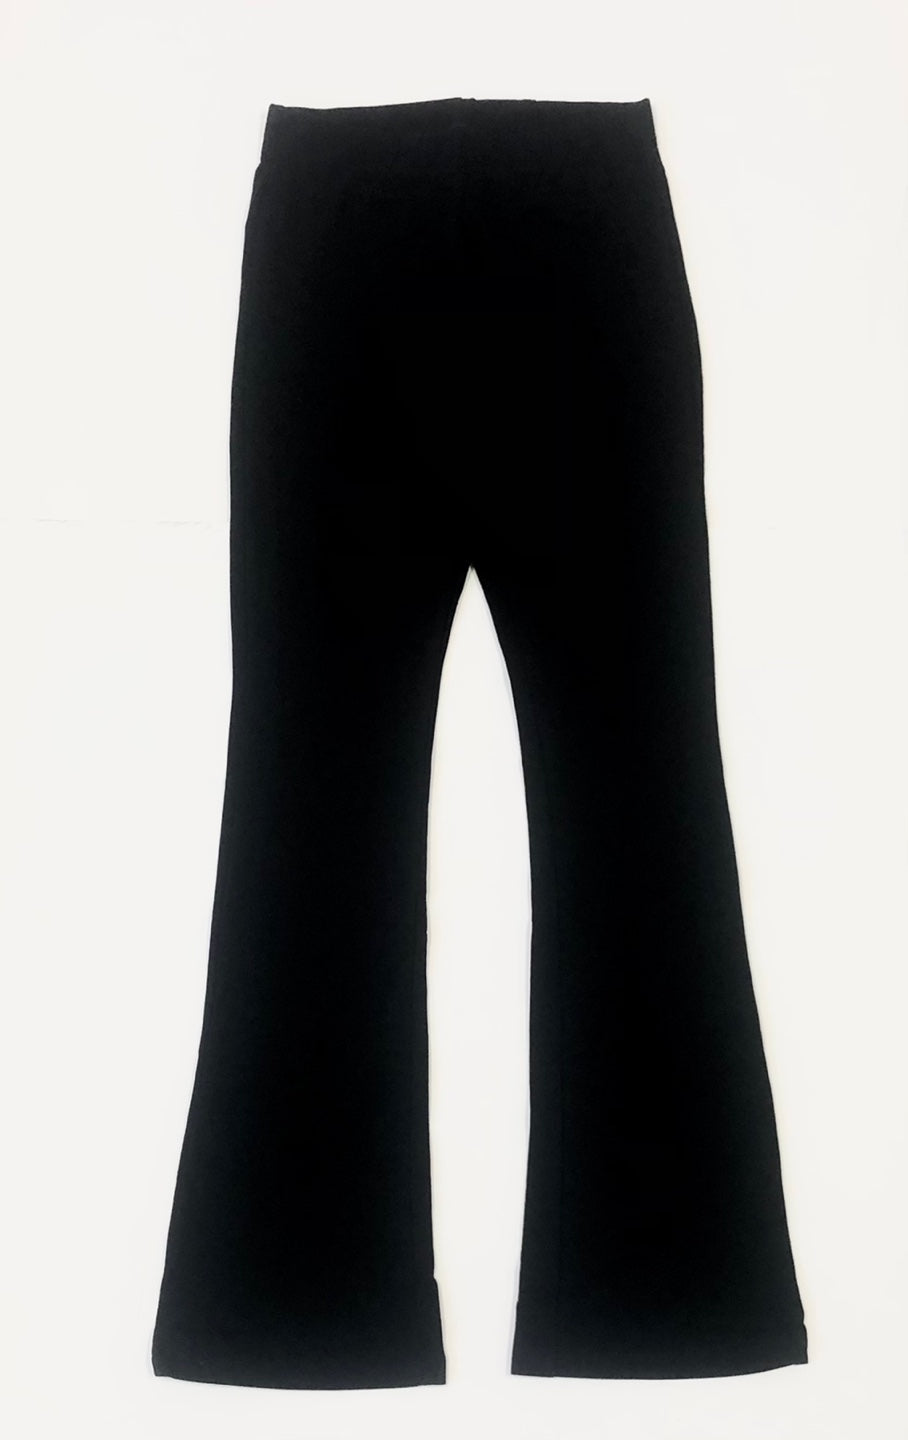 Pull On Sweater Flare Pants *XS-L*, Women's Clothing